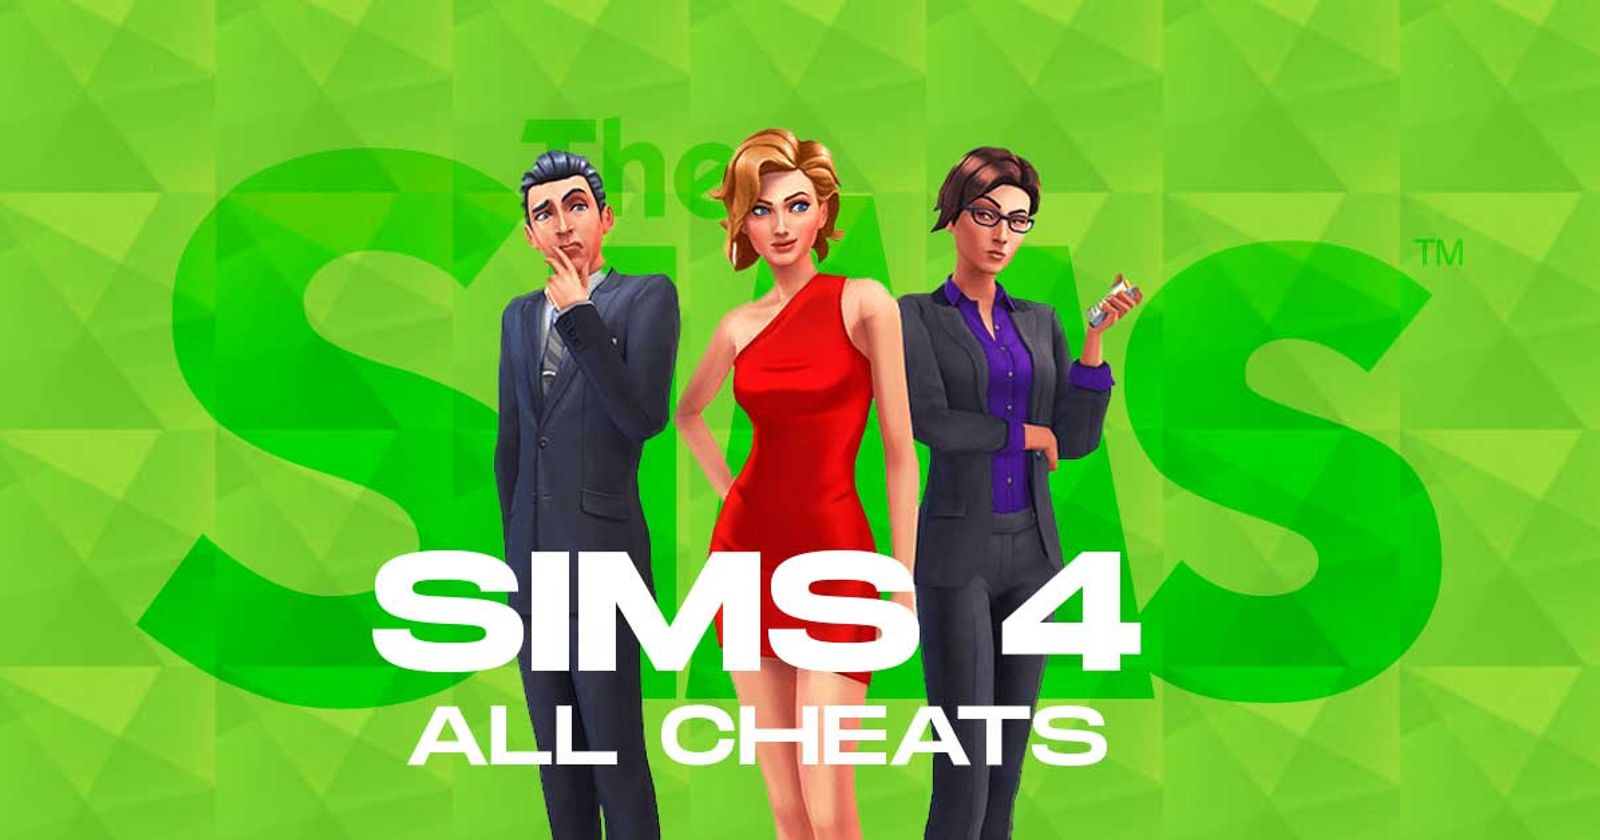 Gammel mand Palads mulighed Sims 4 Cheats: All cheat codes for PS4, Xbox One, PC & Mac